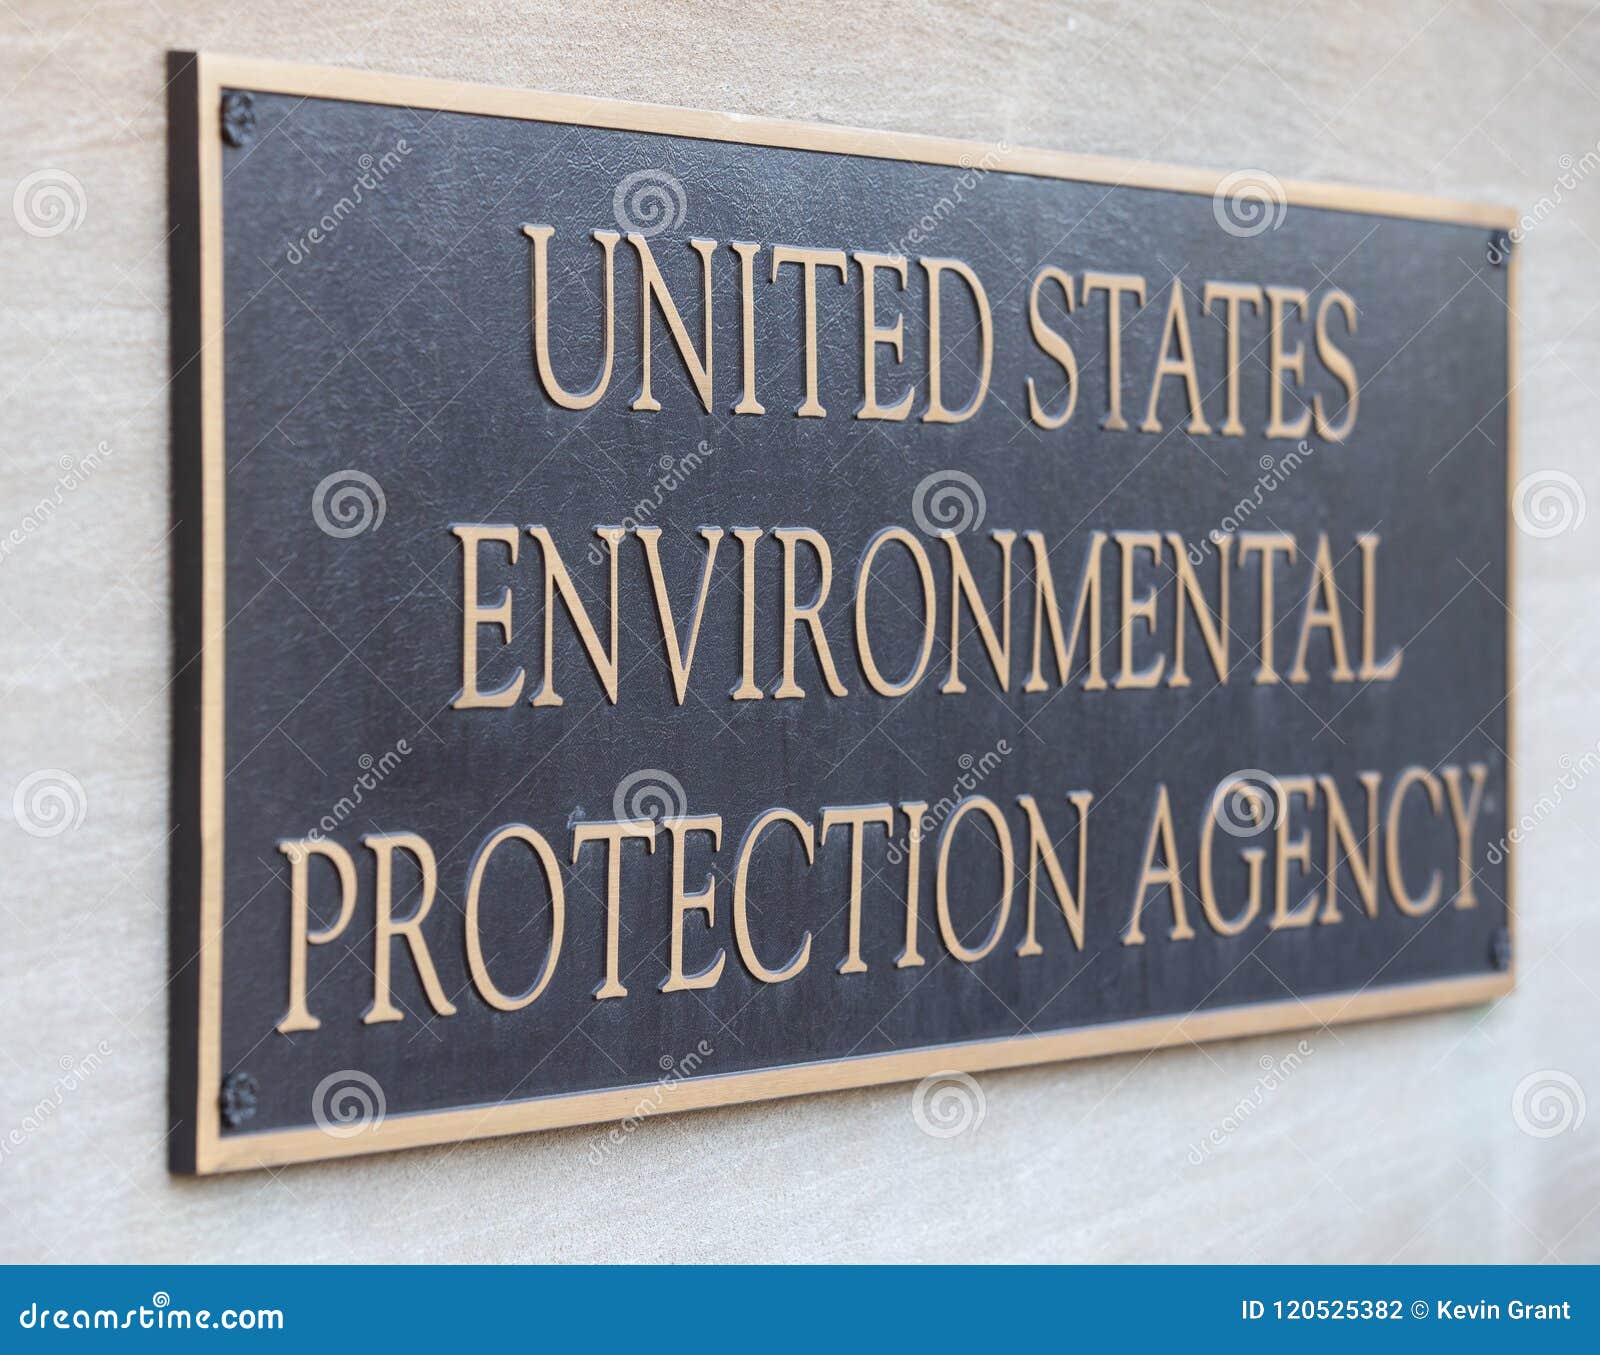 environmental protection agency headquarters building sign